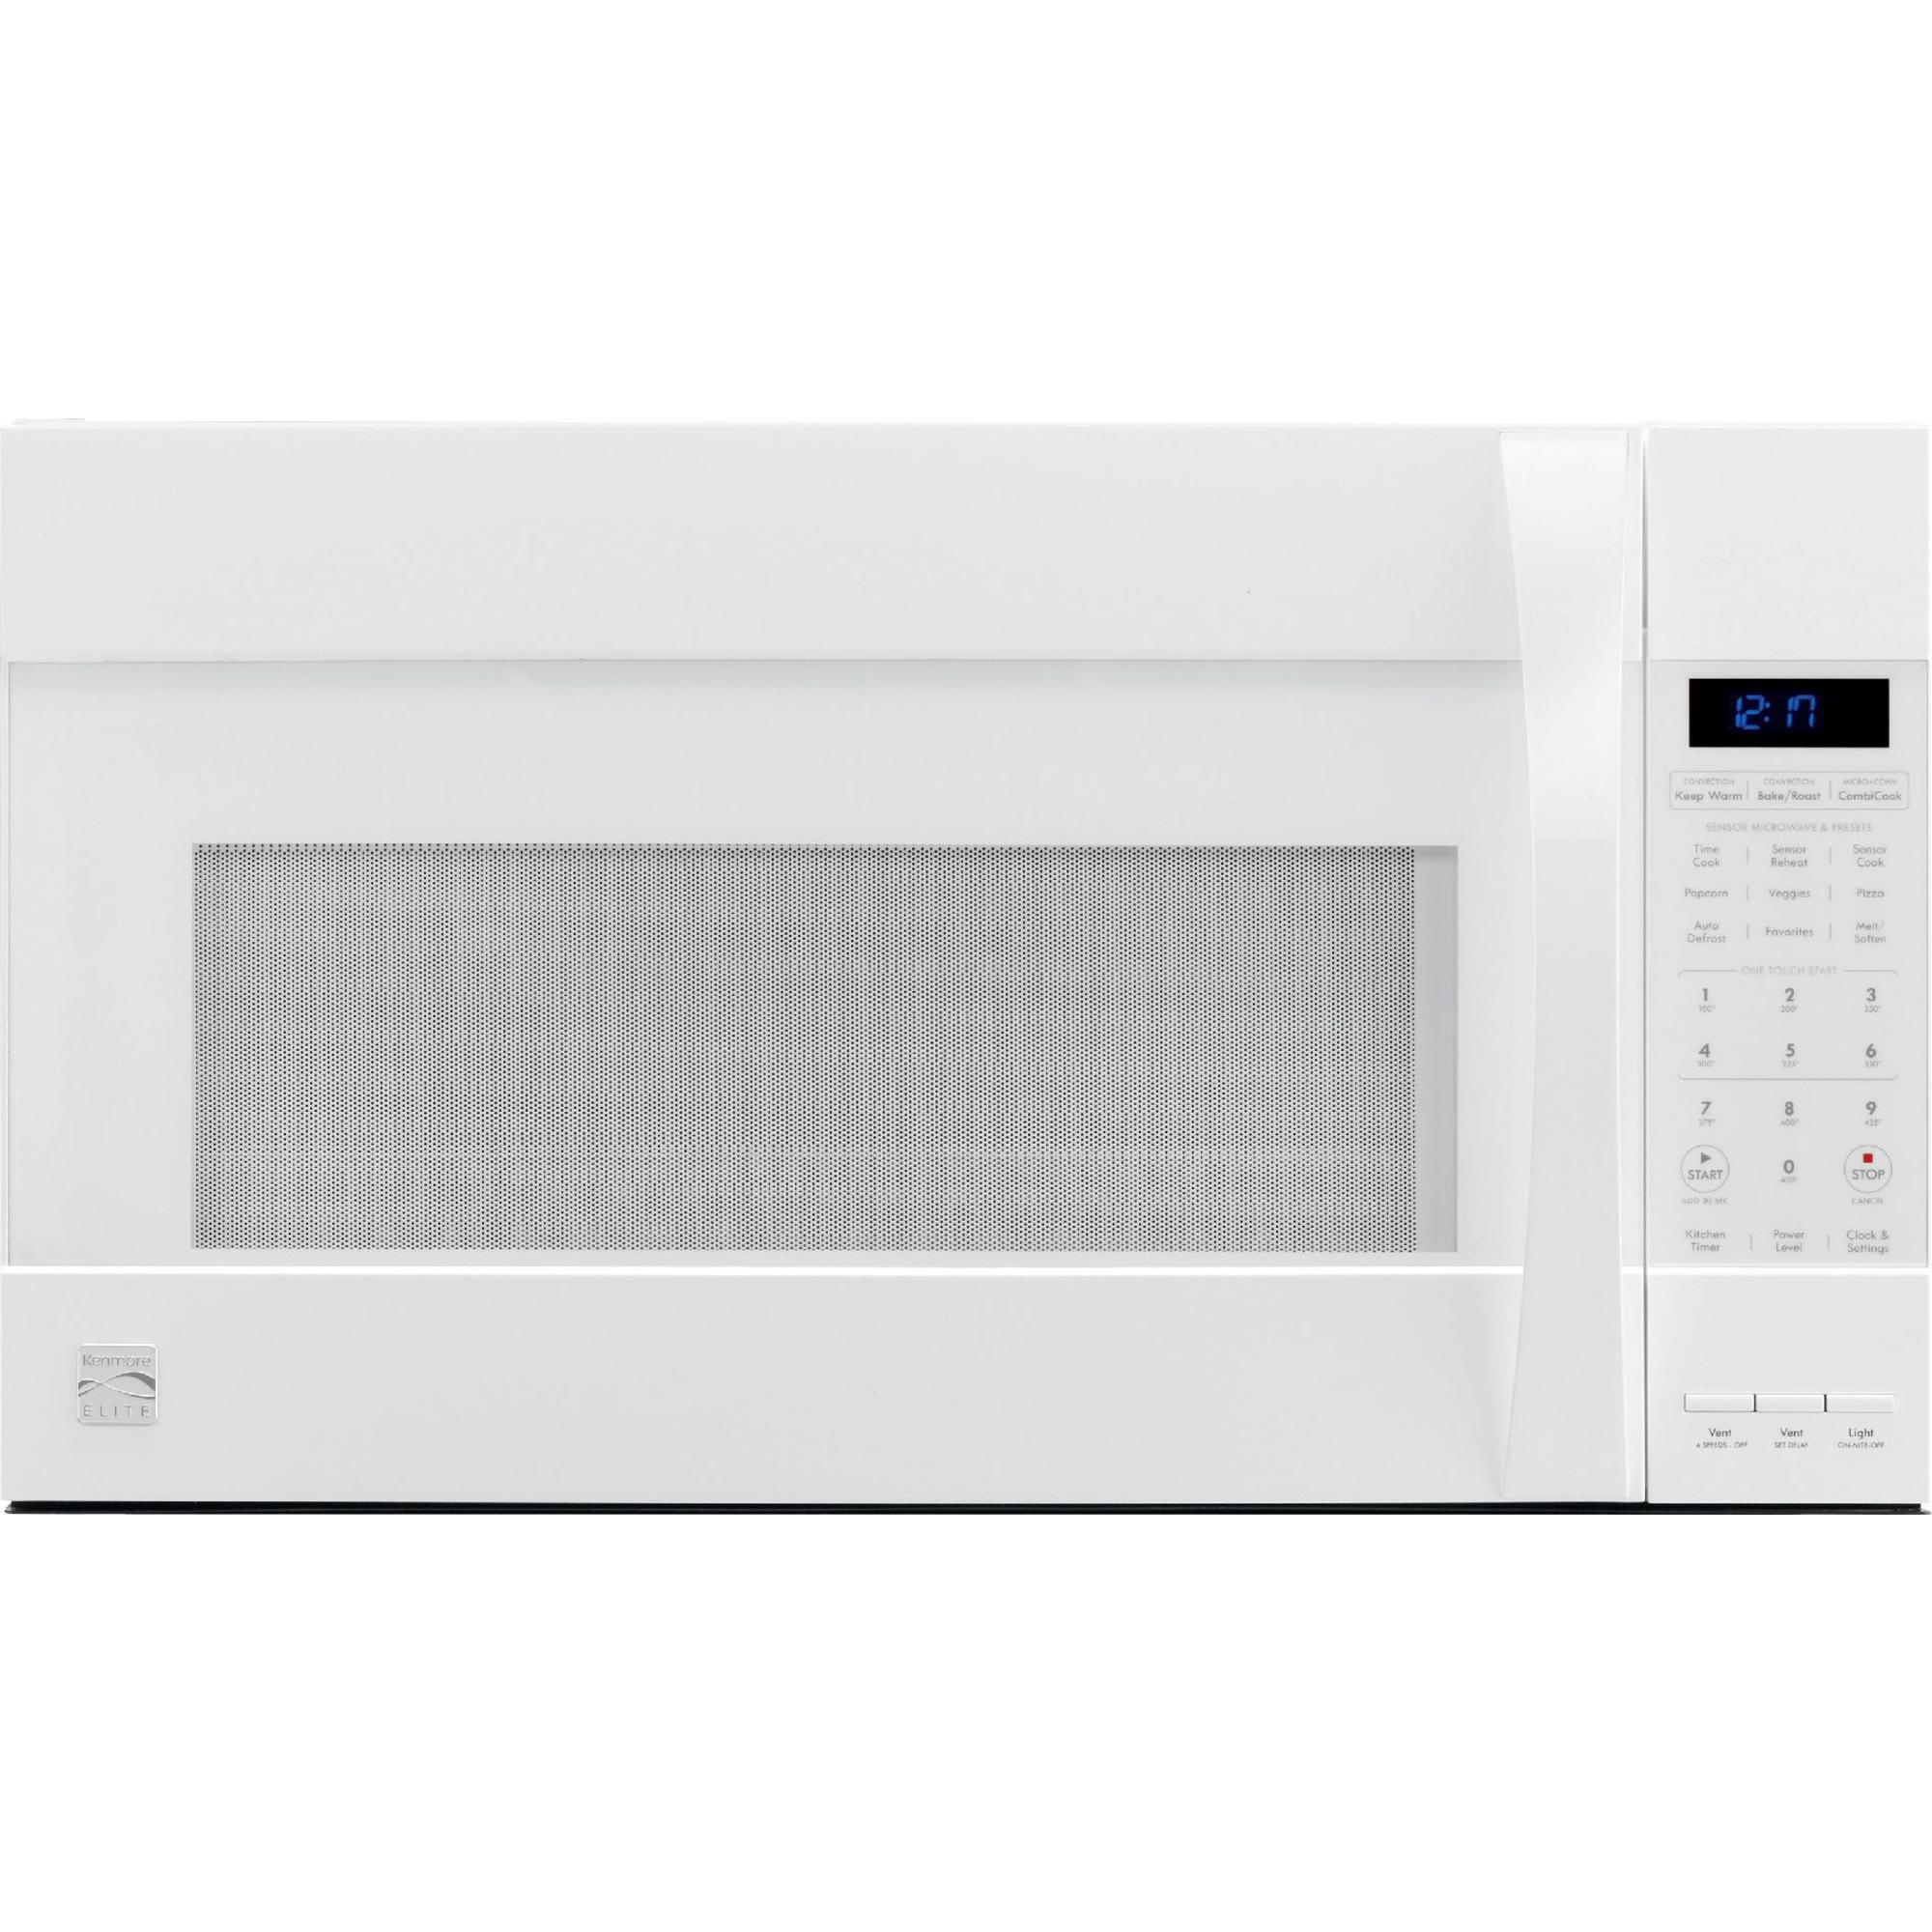 Kenmore Elite 80372 1.8 cu. ft. Over-the-Range Convection Microwave